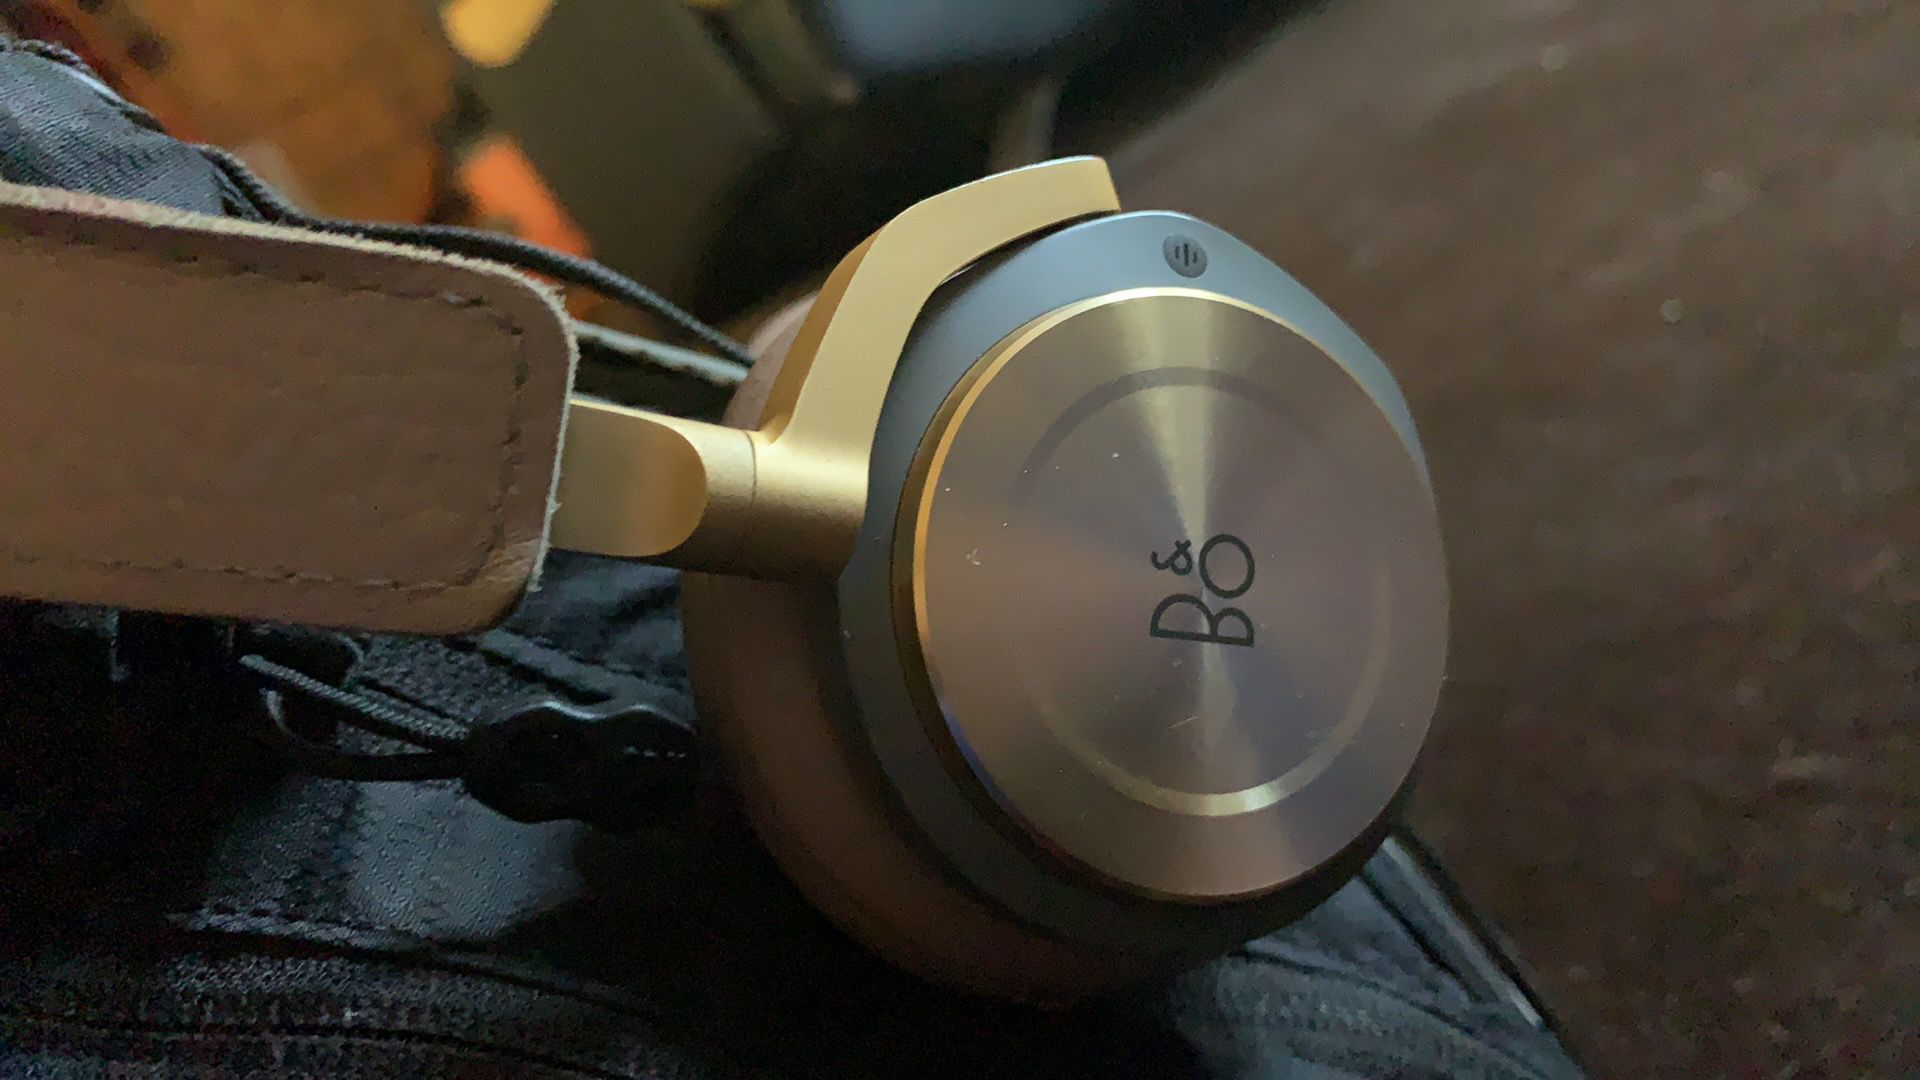 TODAY ONLY!!! B&O H8 wireless headphones